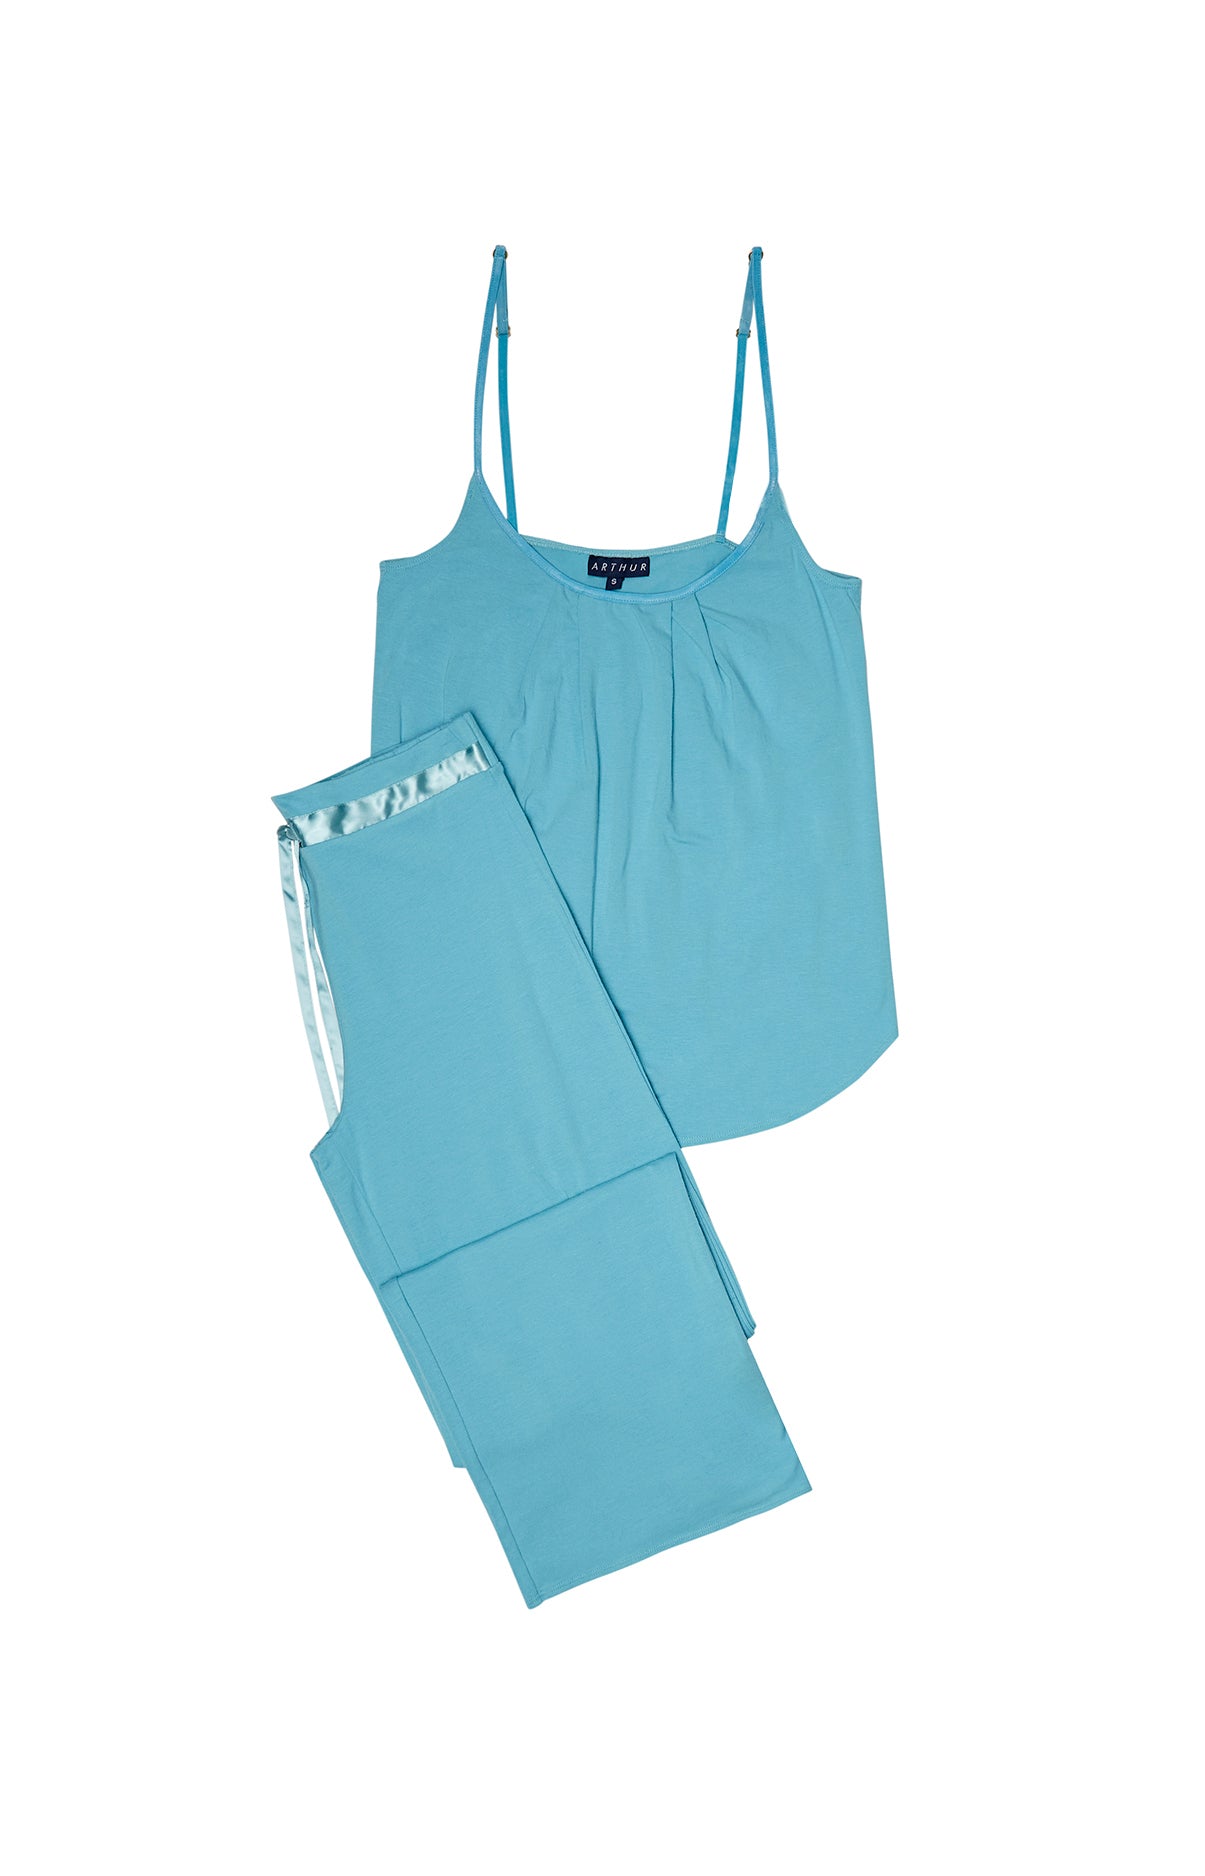 Camisole pants - Atoll